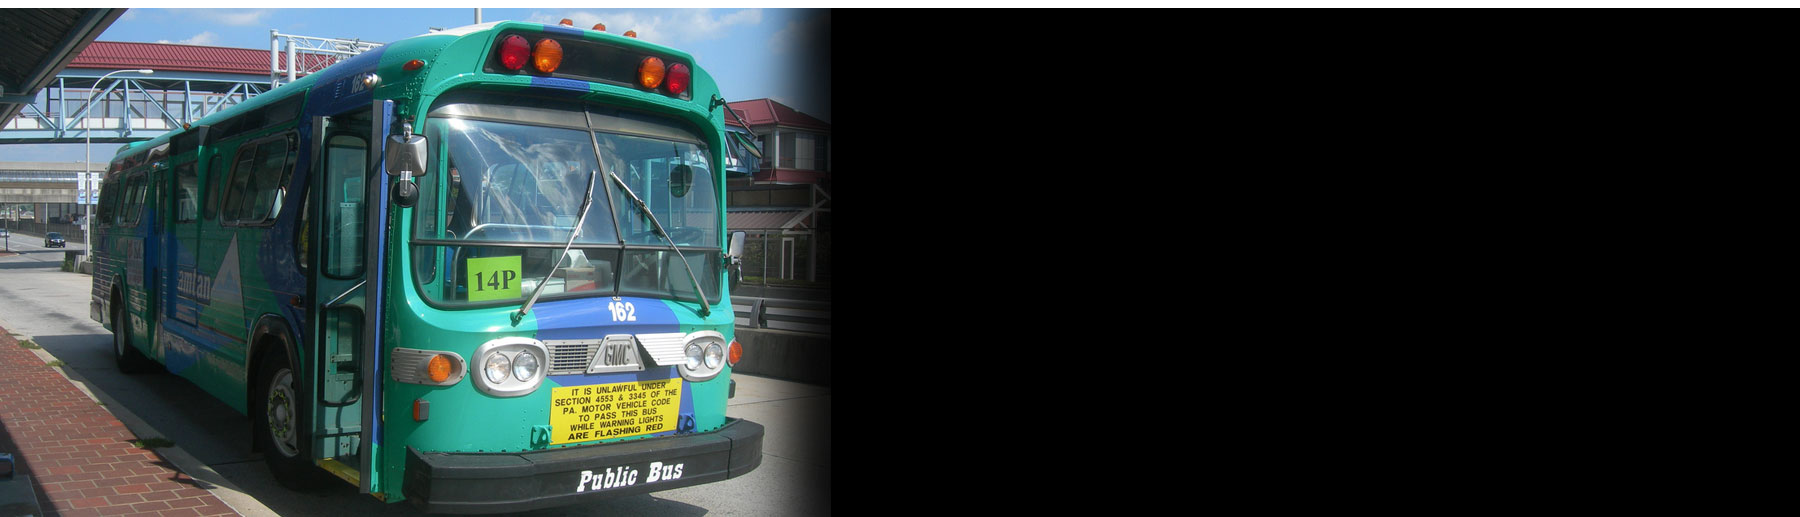 AMTRAN Launches Redesigned Website and New Mobile Website